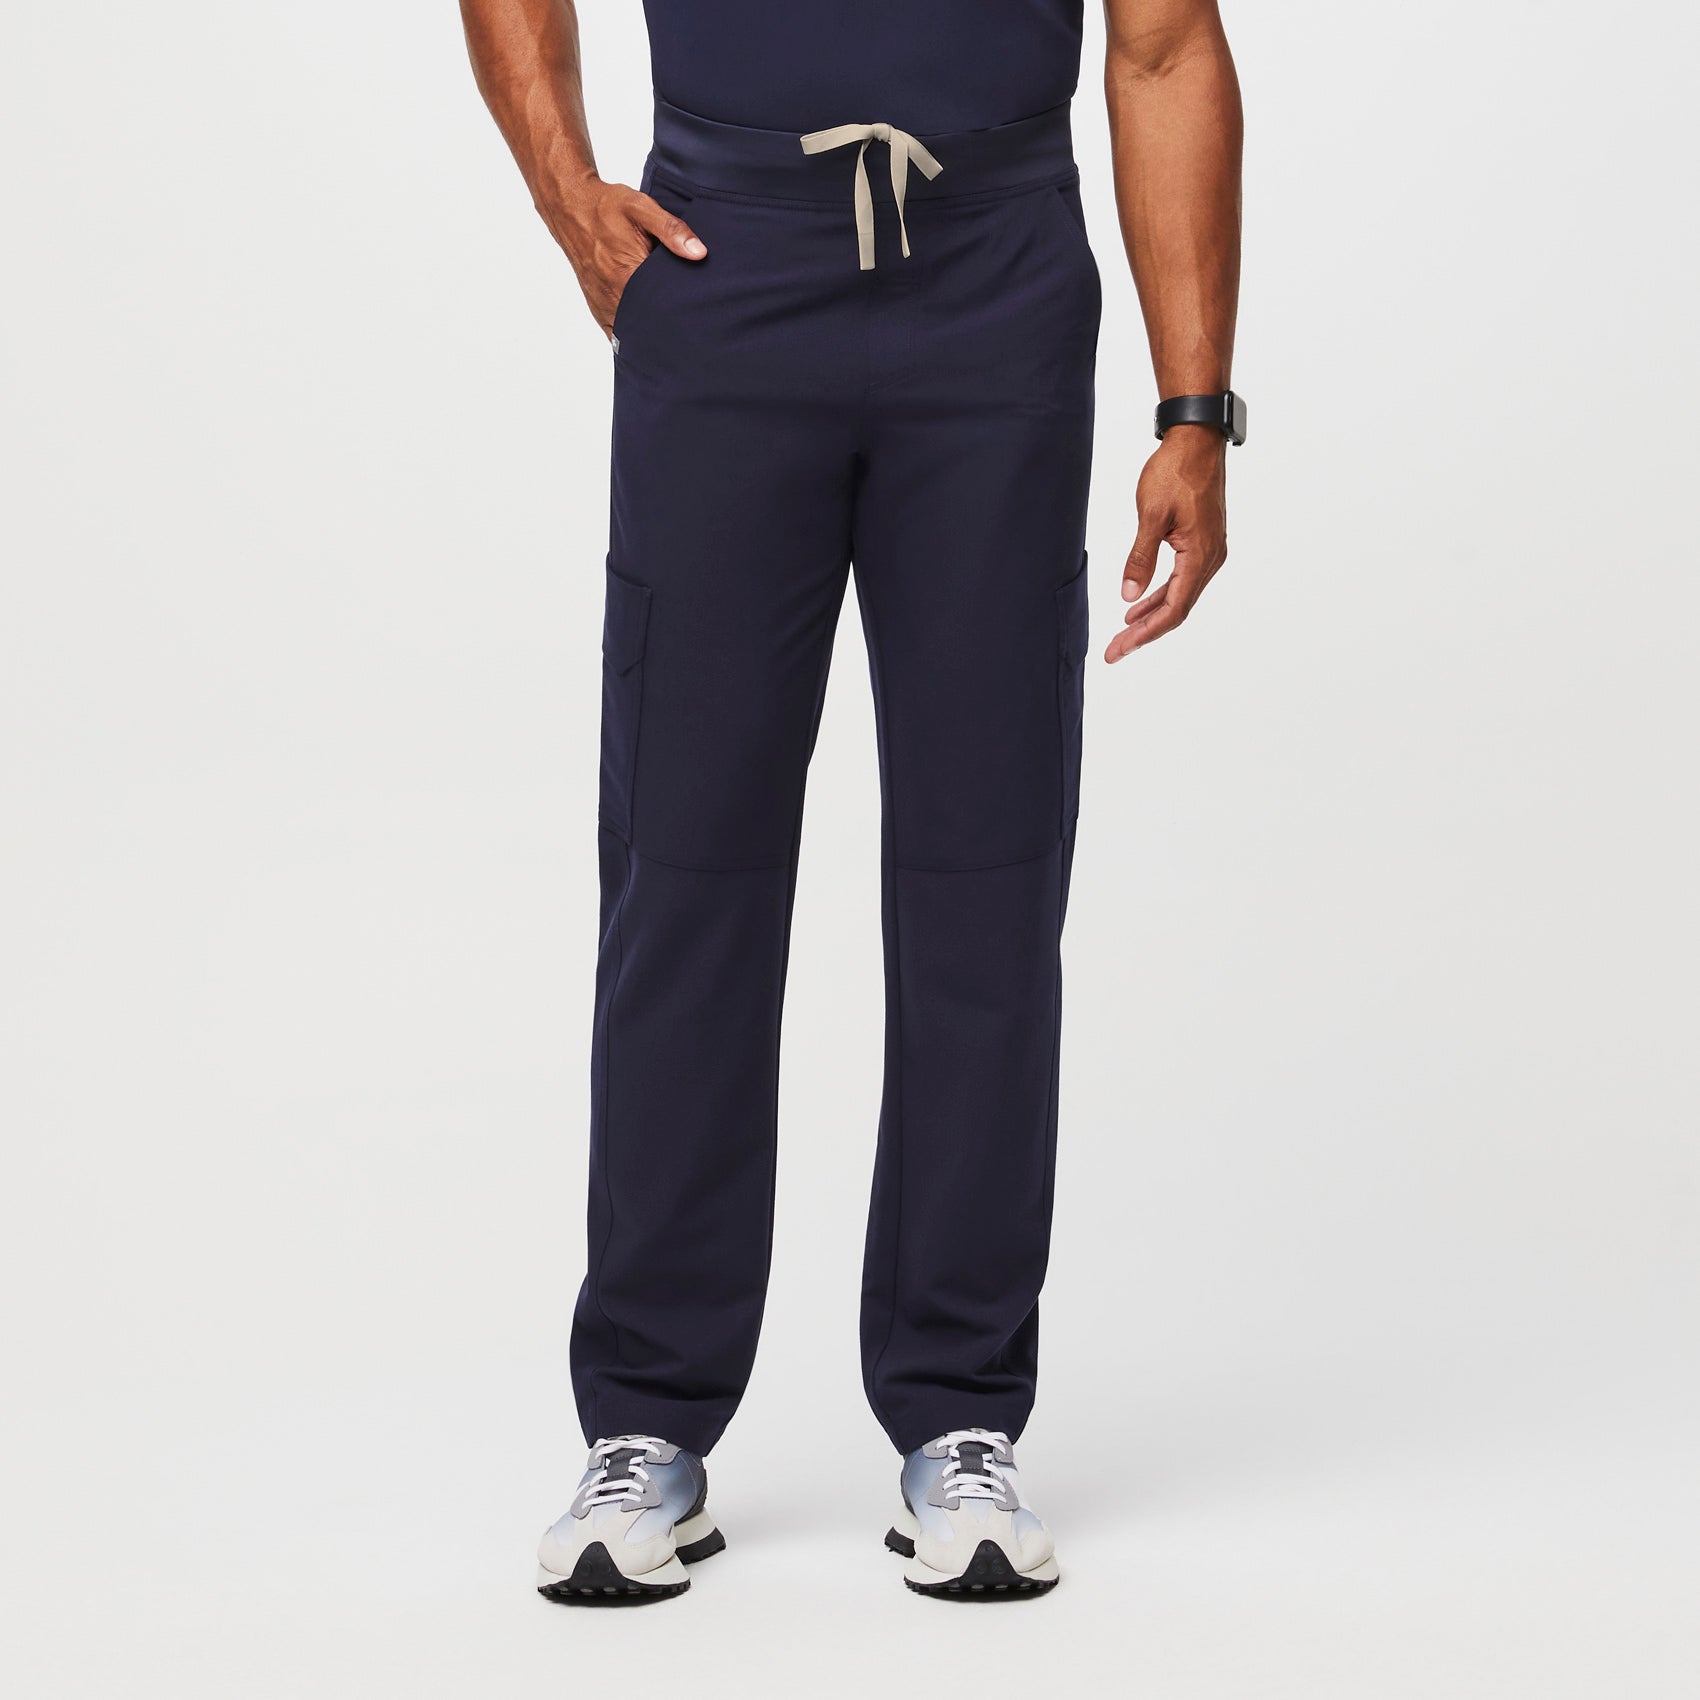 Anon Men's Scrub Pants (Stealth Collection) Poly/Spandex